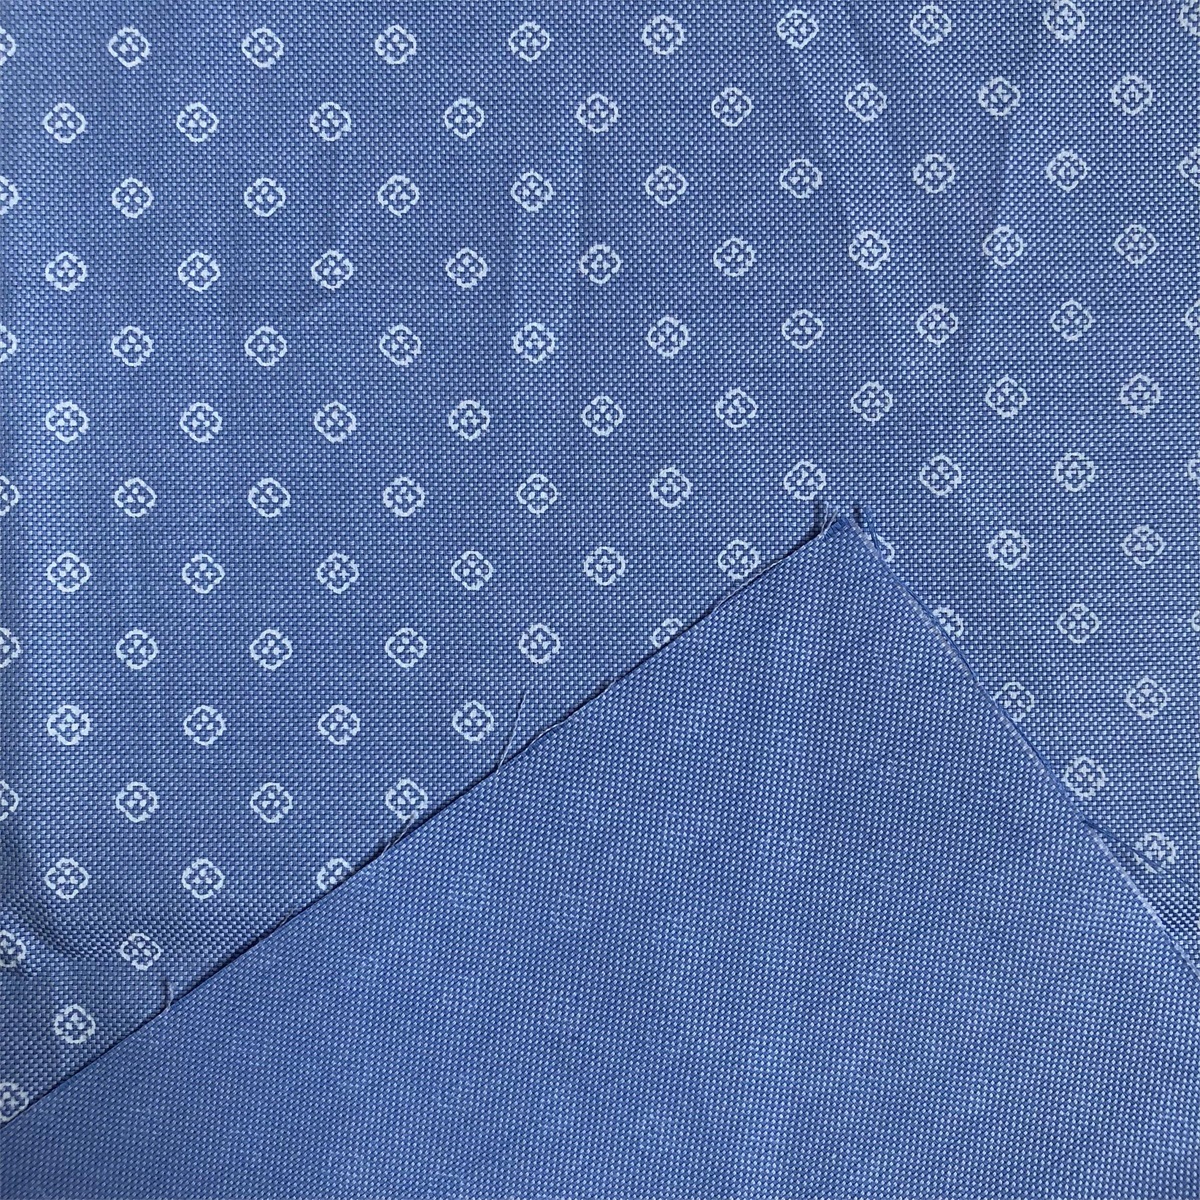 Soft breathable cotton fabric for mens shirts 100 cotton printed on oxford chambray fabric